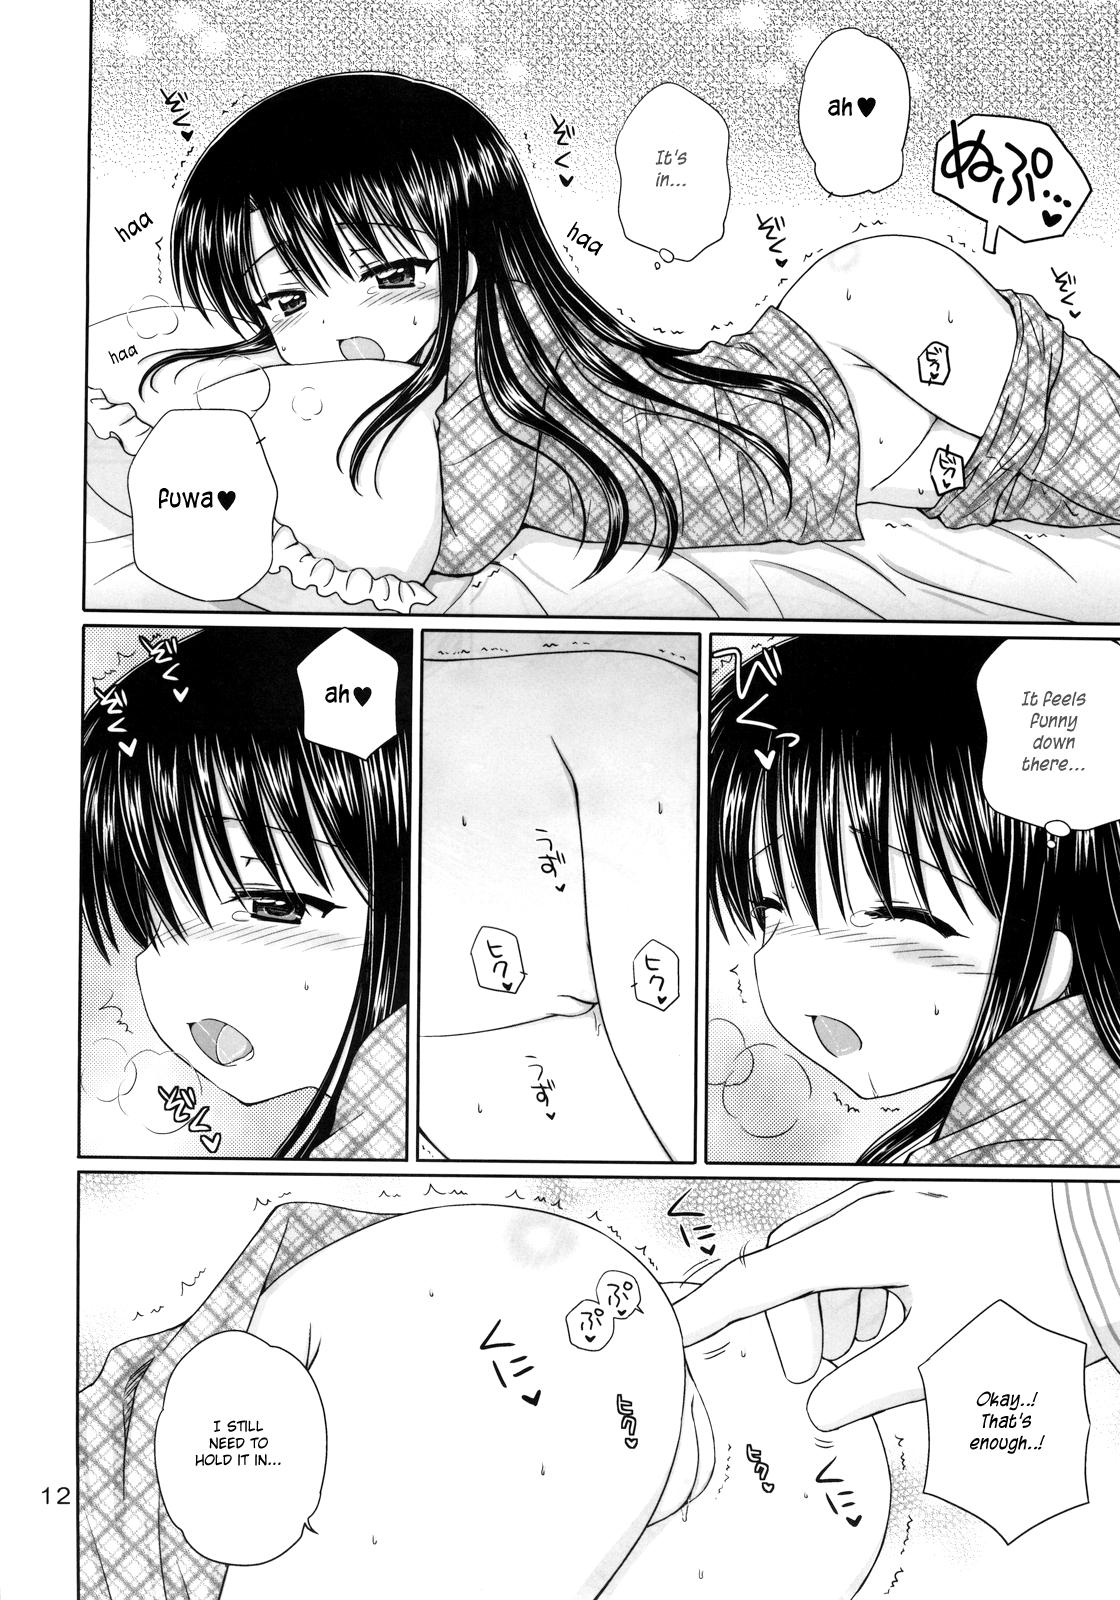 Mommy DG - Daddy’s Girl Vol. 3 Uncensored - Page 11